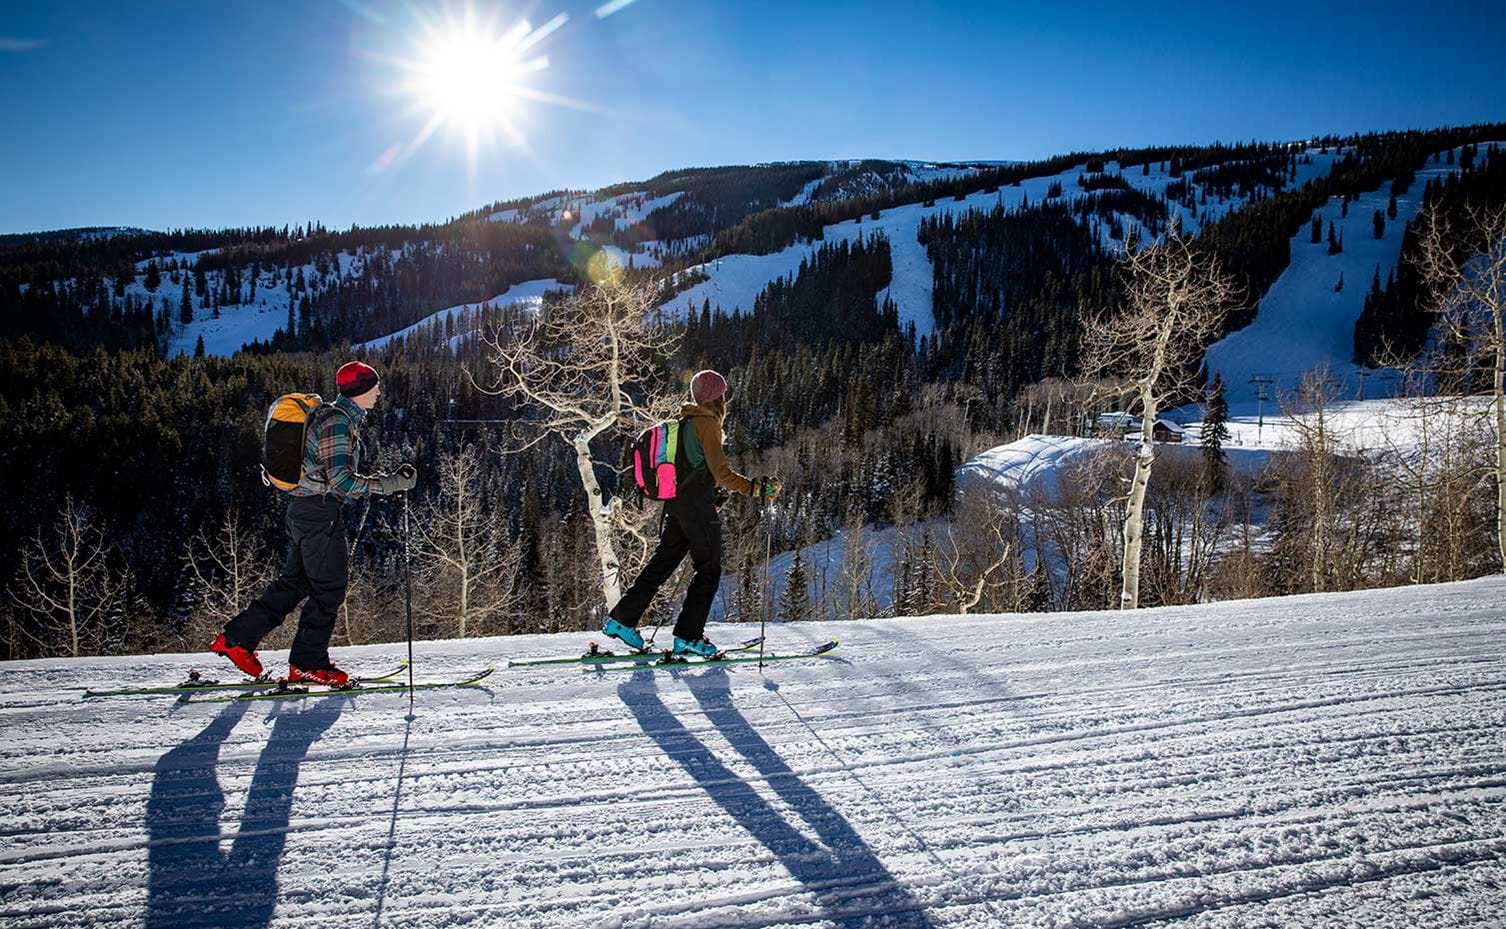 Two uphill skiers ascend Snowmass